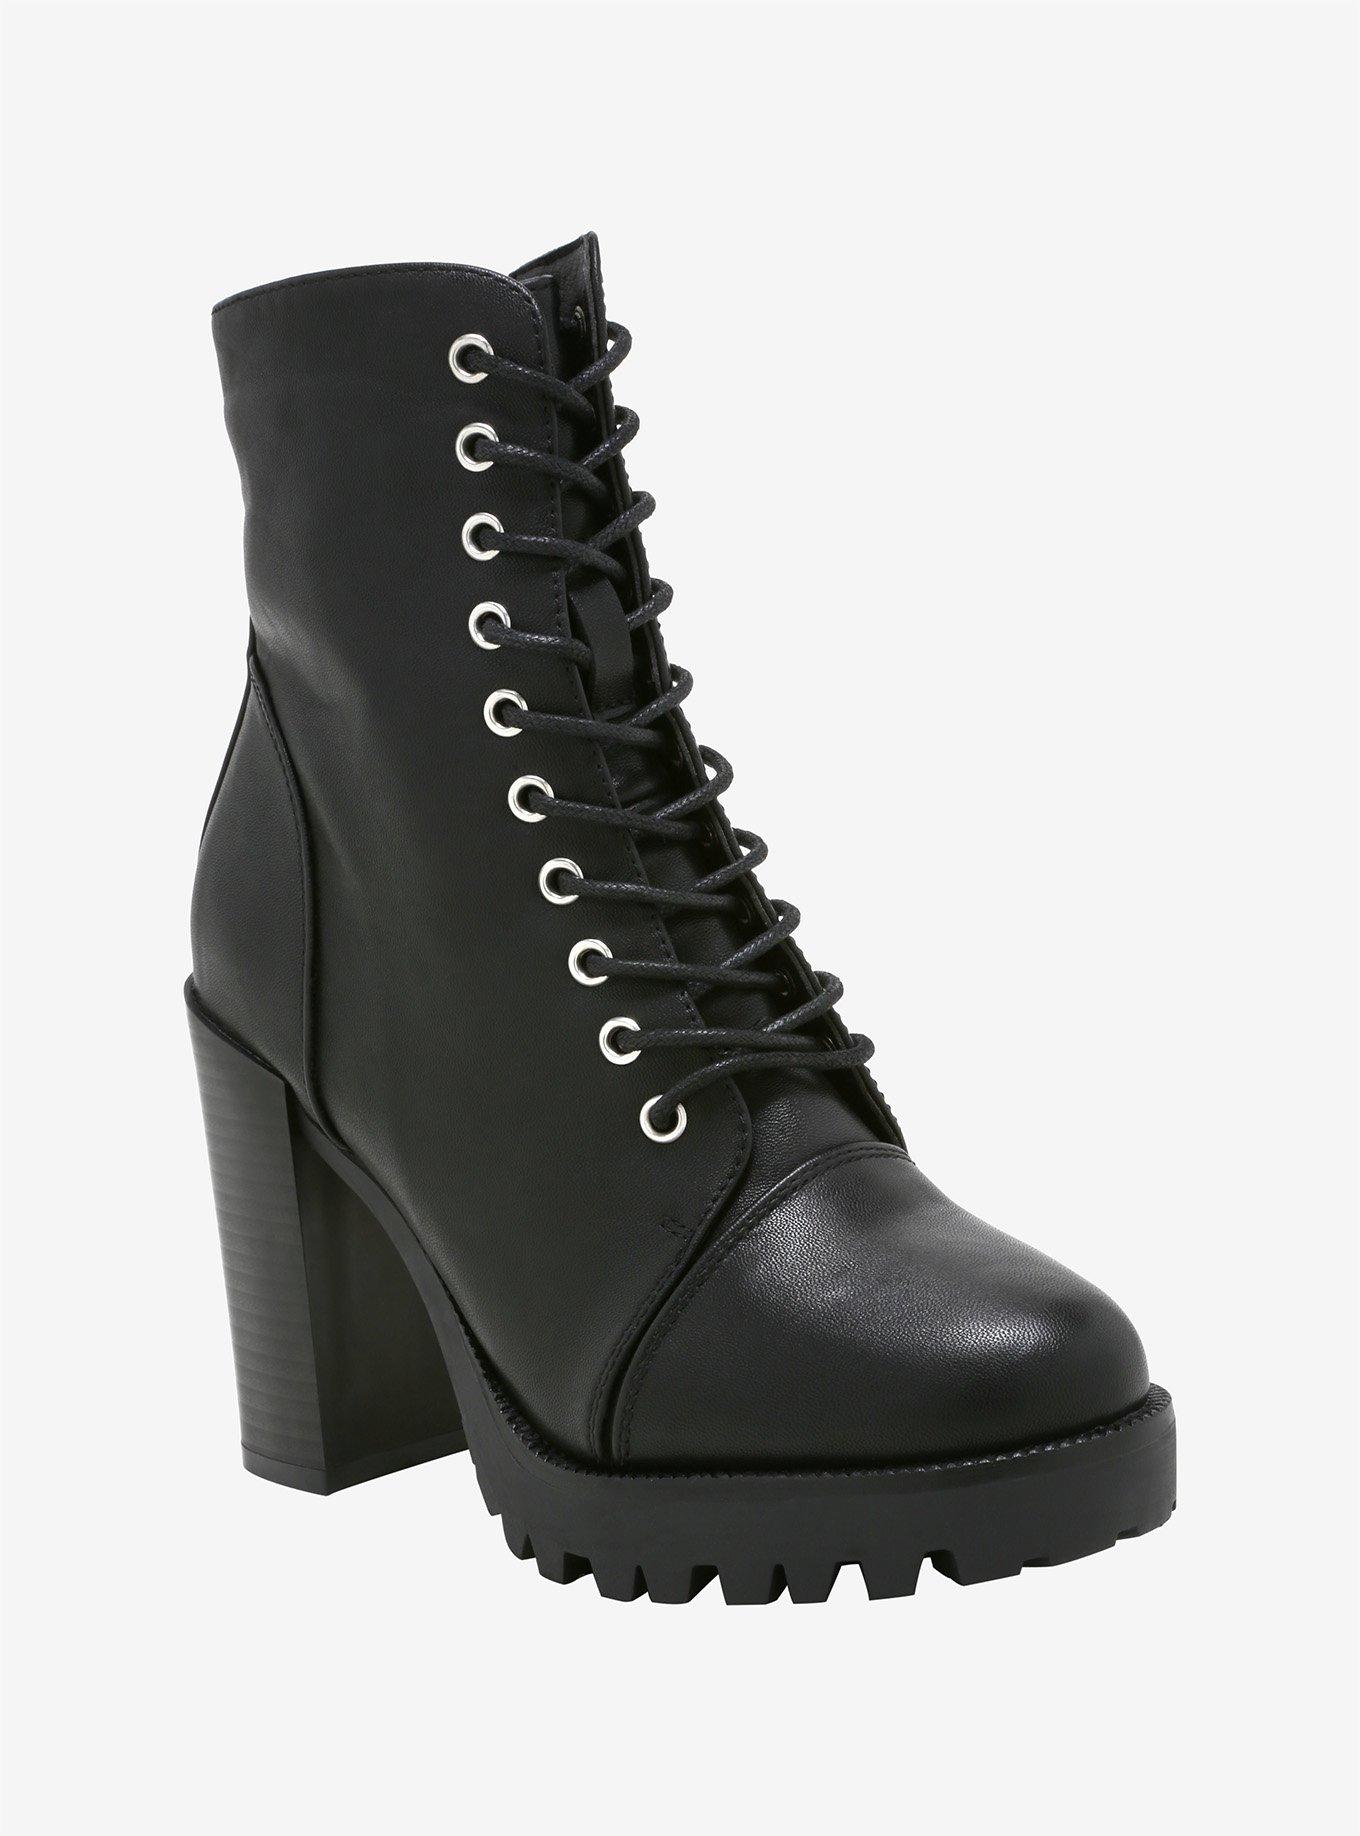 Women's Punk Platform Knight Ankle Boots Zip Creeper Block Thick Heel Shoes